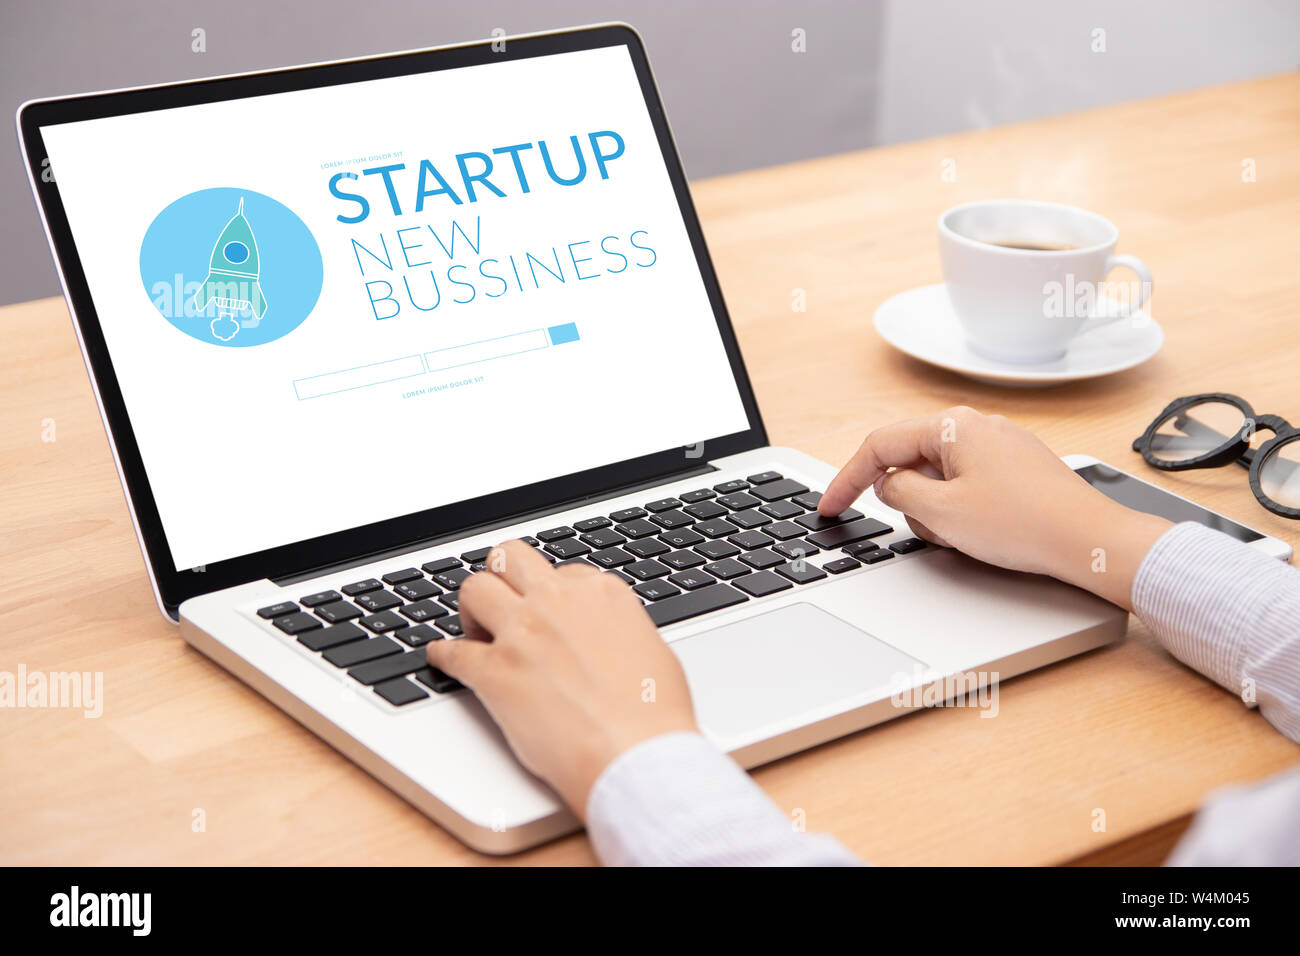 business people working on notebook laptop computer with startup business and rocket logo on screen, start up ideas business development Stock Photo